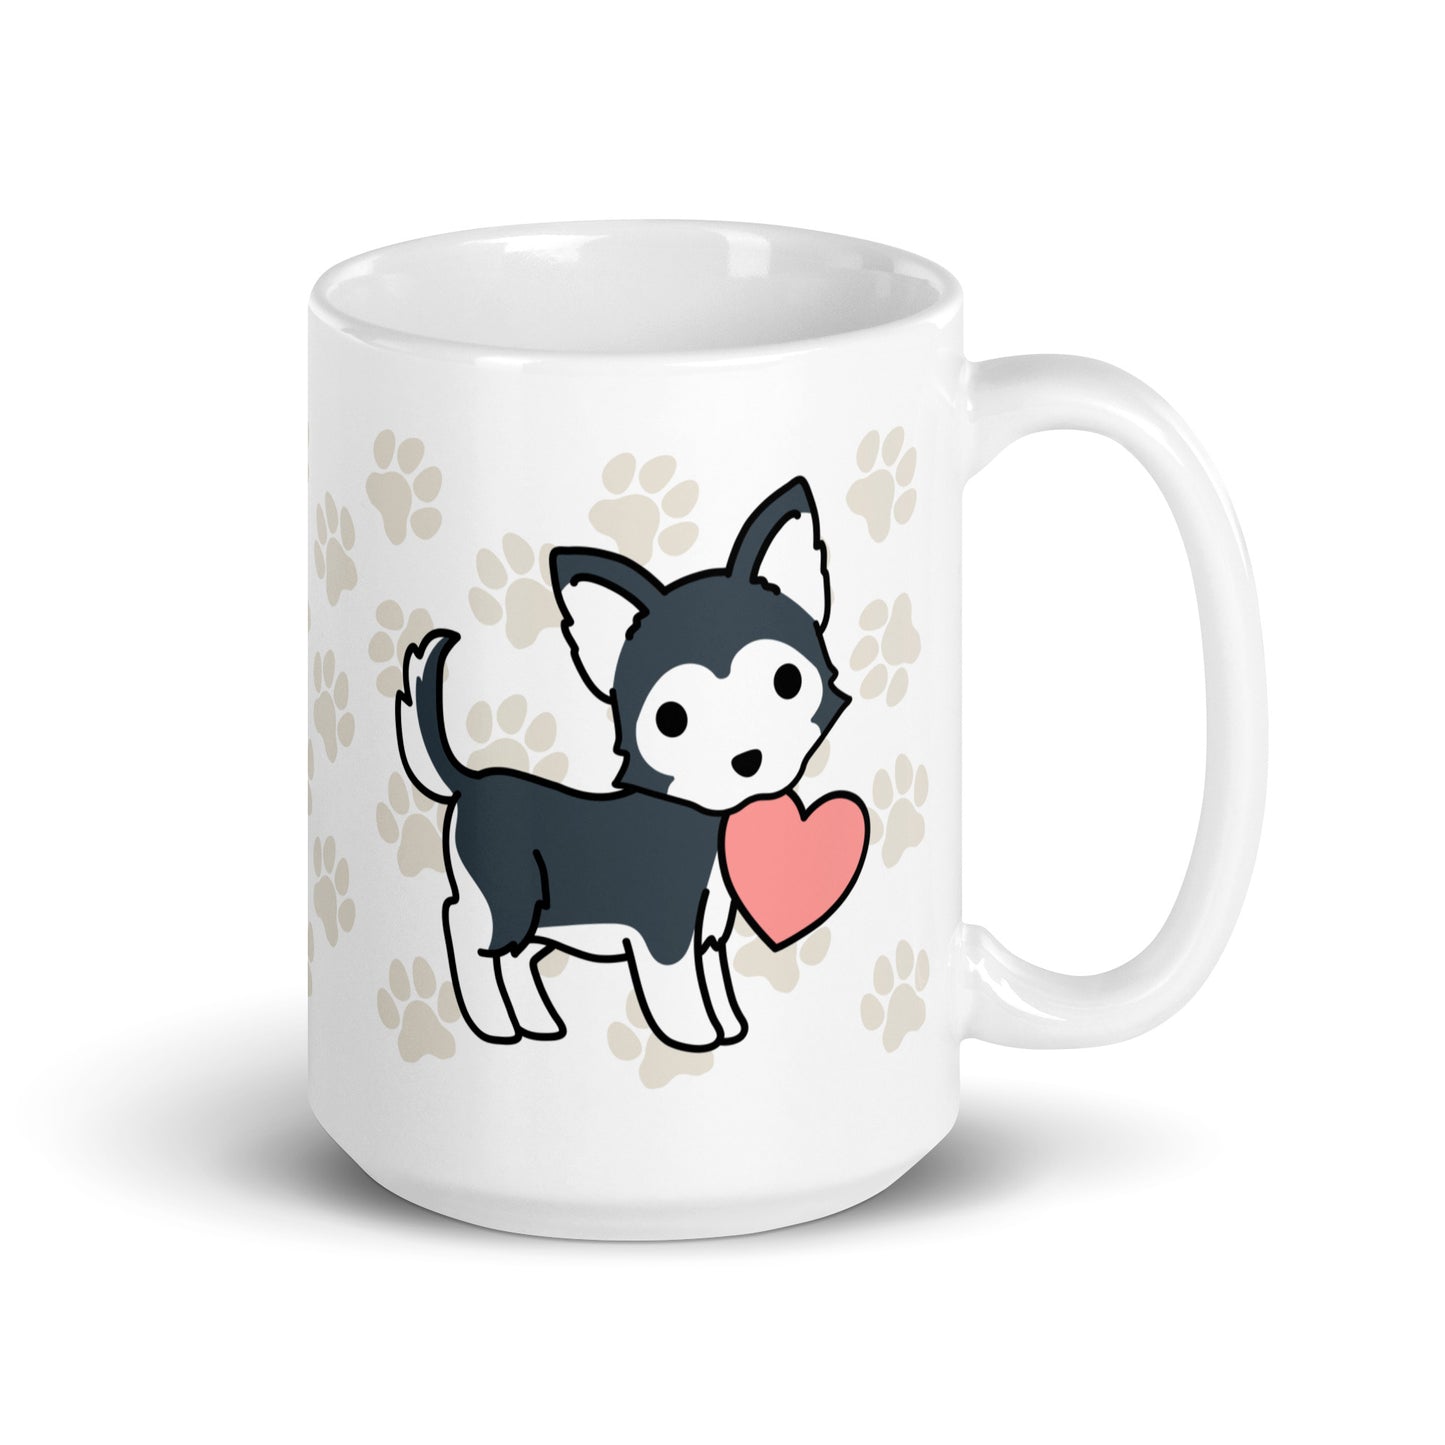 A white 15 ounce ceramic mug with a pattern of light brown pawprints all over. The mug also features a stylized illustration of a Husky holding a heart in its mouth.